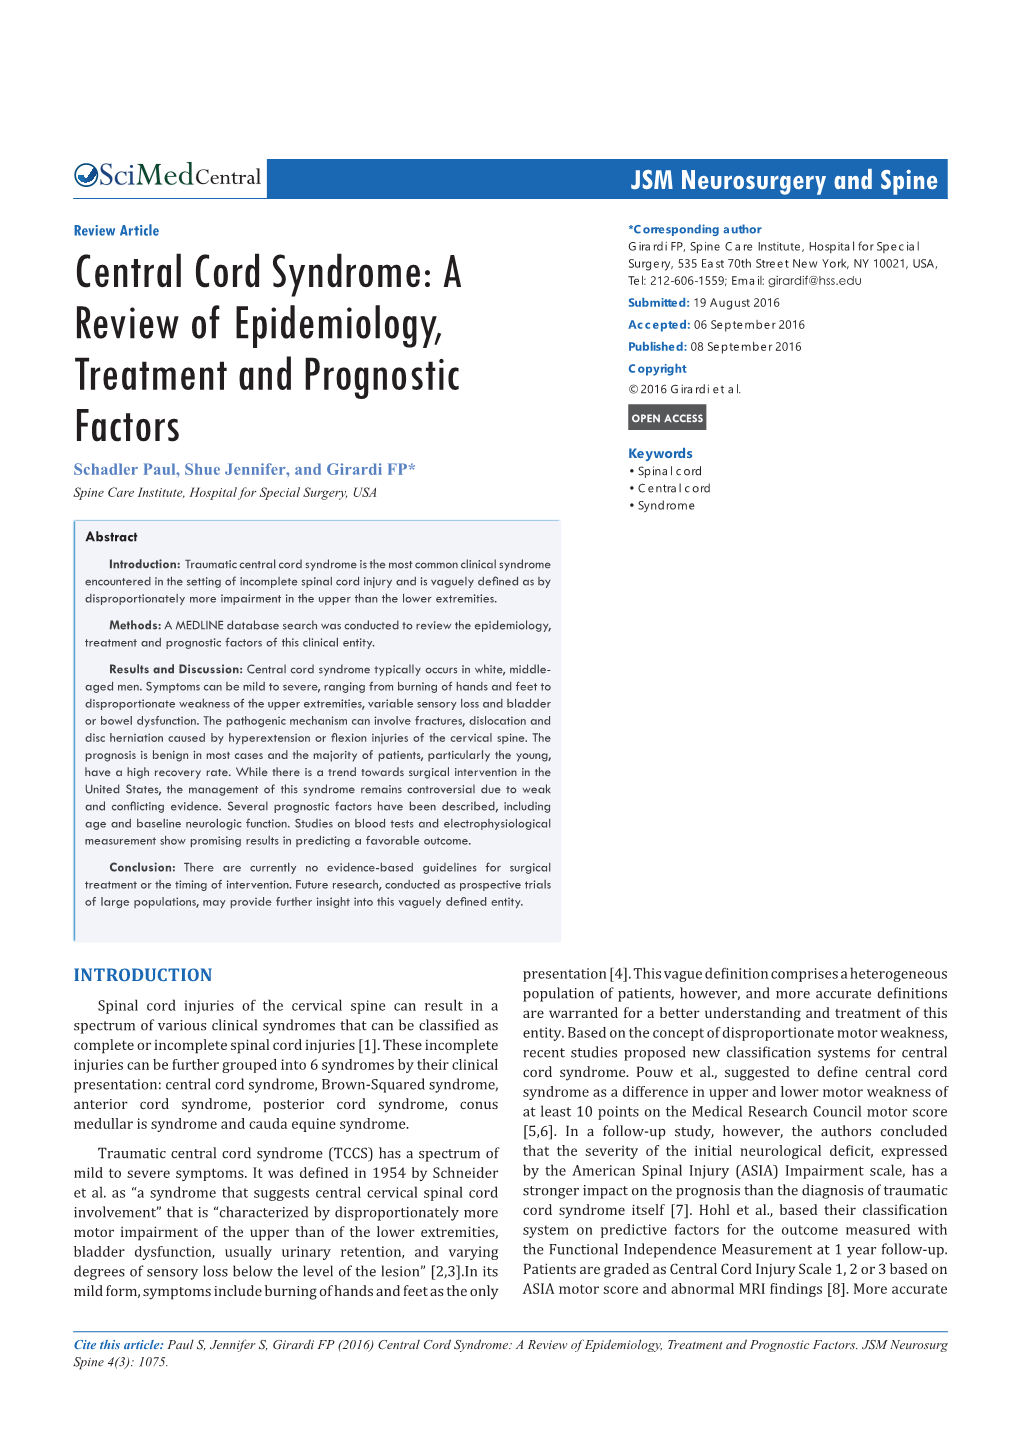 Central Cord Syndrome